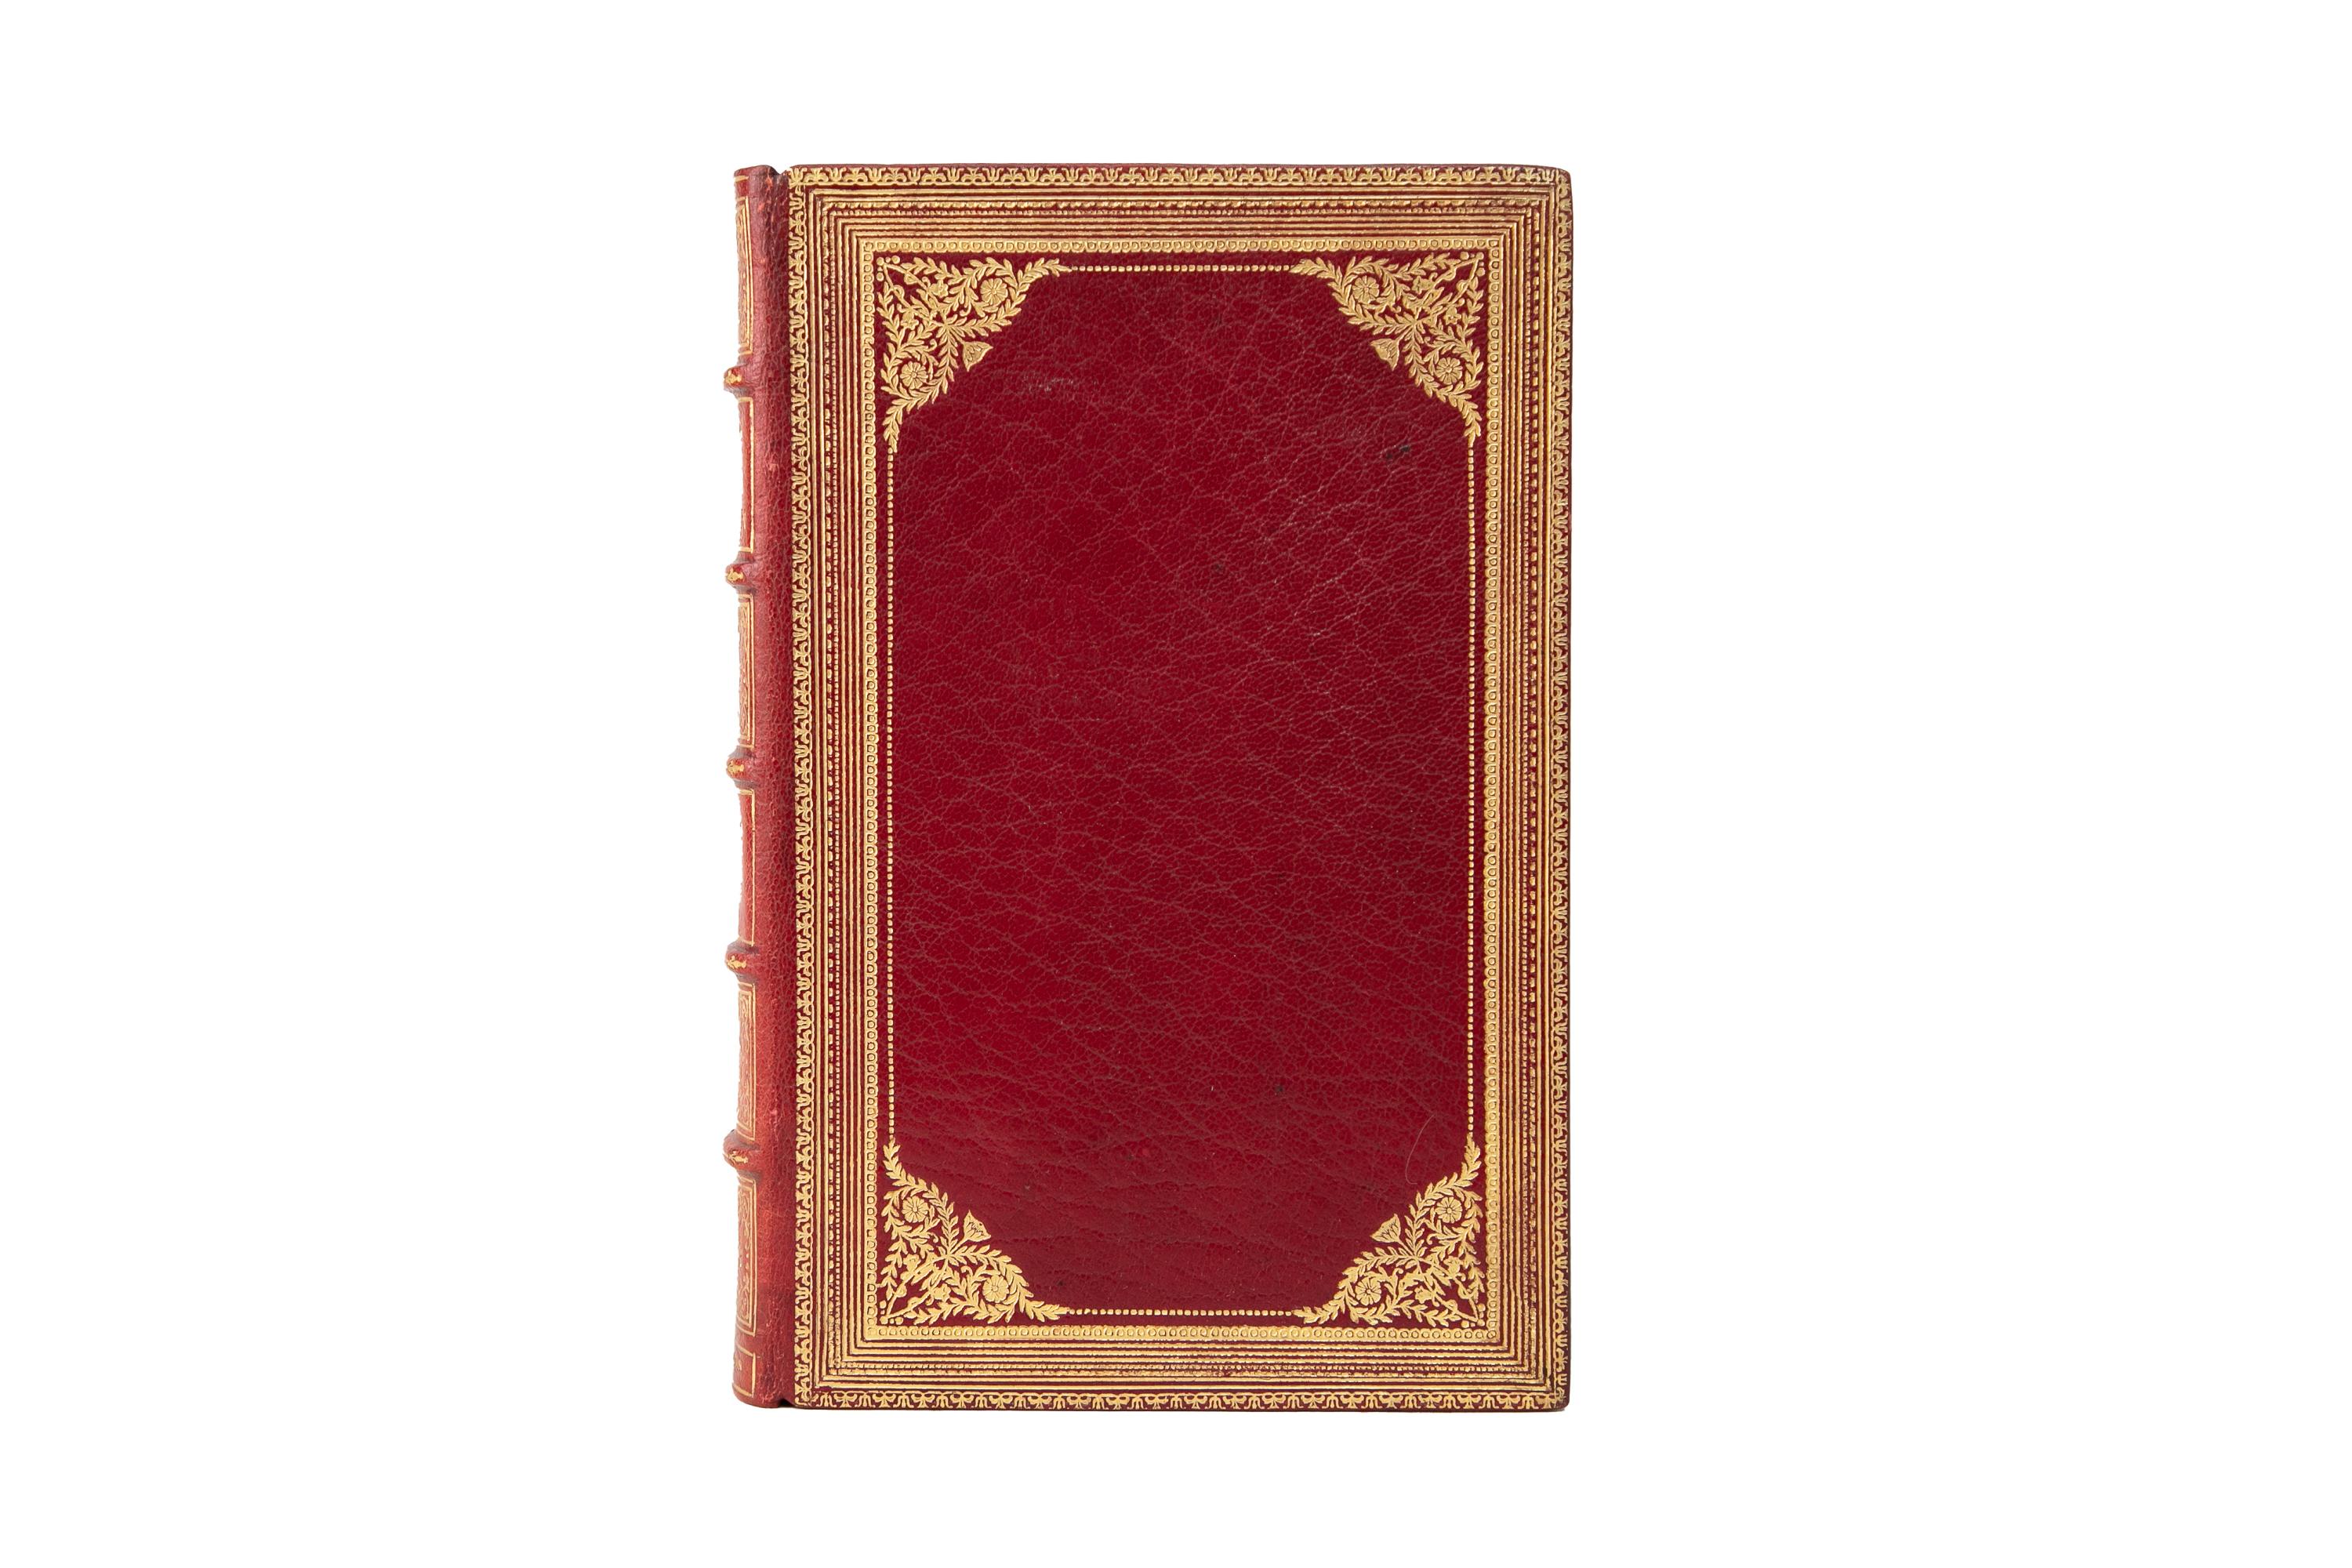 10 Volumes. James Boswell, Life of Samuel Johnson & Journal of the Tour to the Hebrides. Temple Bar Edition. Bound in full red morocco with ornate gilt-tooled detailing on the covers. Raised band spine with ornate floral gilt-tooled detailing. Top